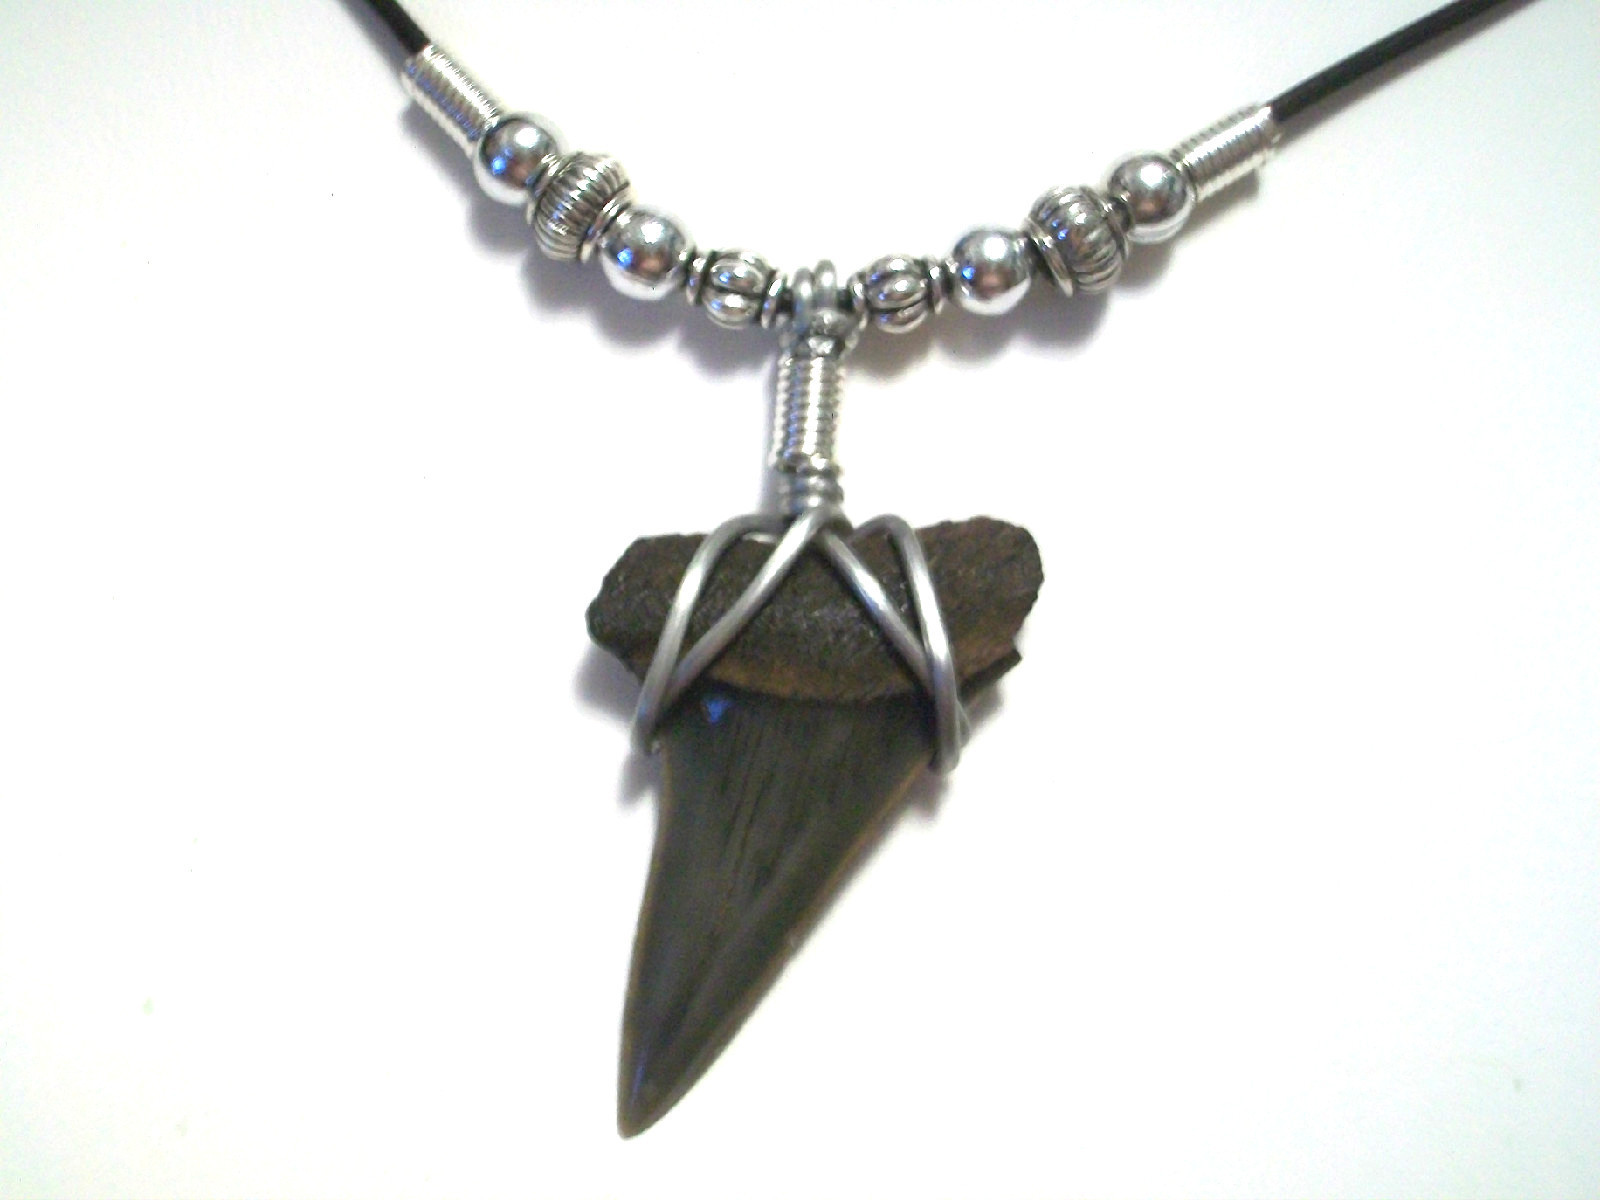 How To Make a Shark Tooth Necklace